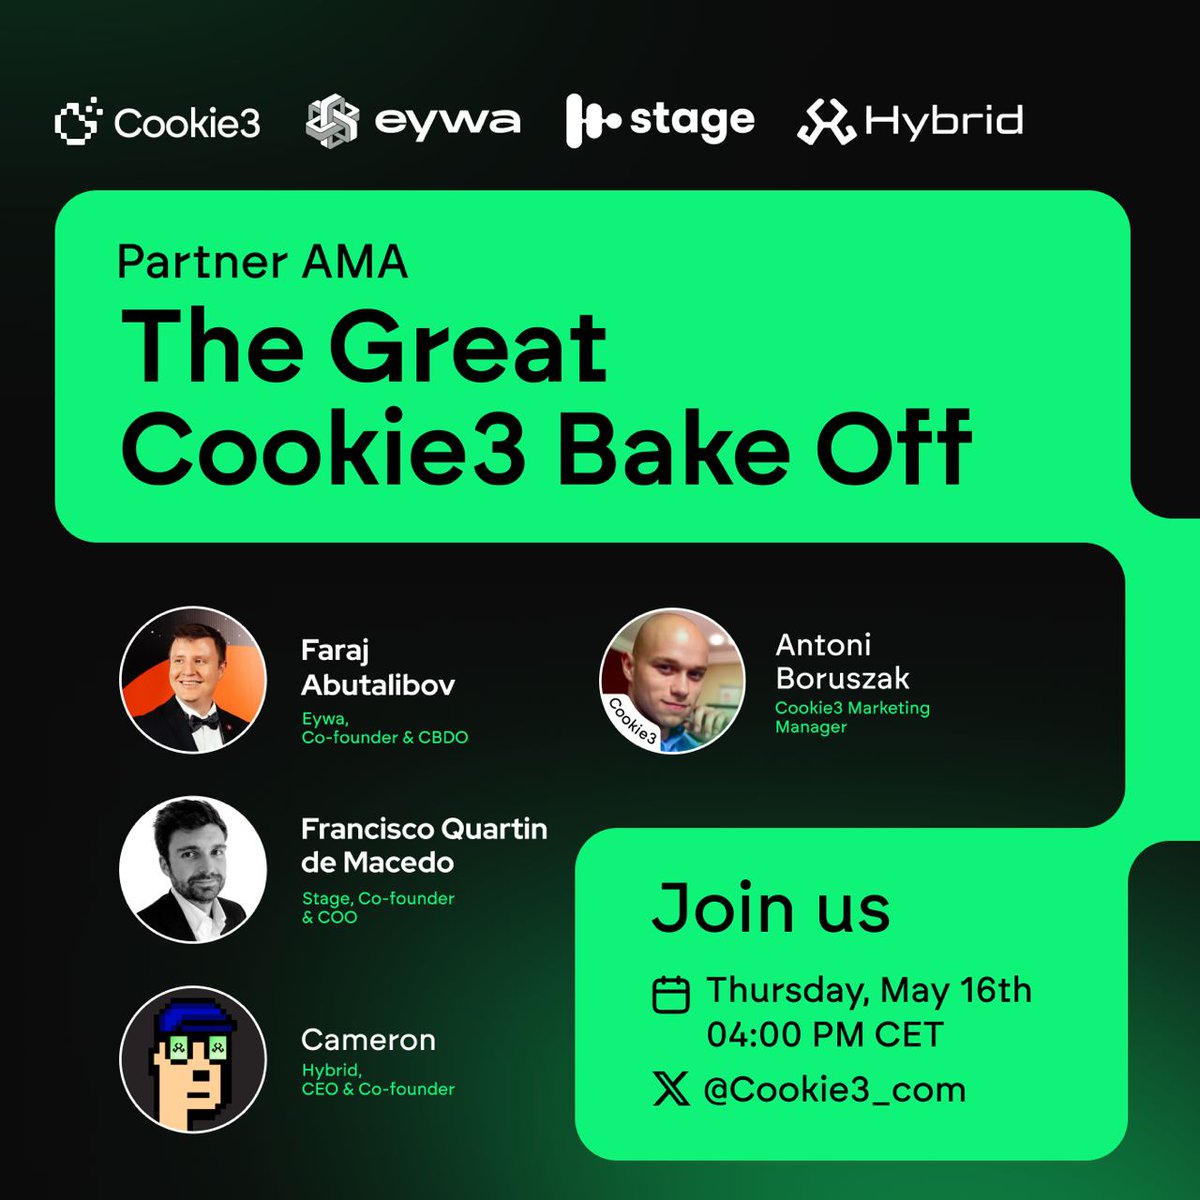 📣 The Great Cookie 3 Bake Off is back for another round!  🎙 This week, we're thrilled to welcome @eywaprotocol, @stage_community and @BuildOnHybrid for an exciting AMA session hosted by @a_boruszak, Cookie3's Marketing Manager.  🗓️ Thursday, May 16th 🕓 4:00 PM CET